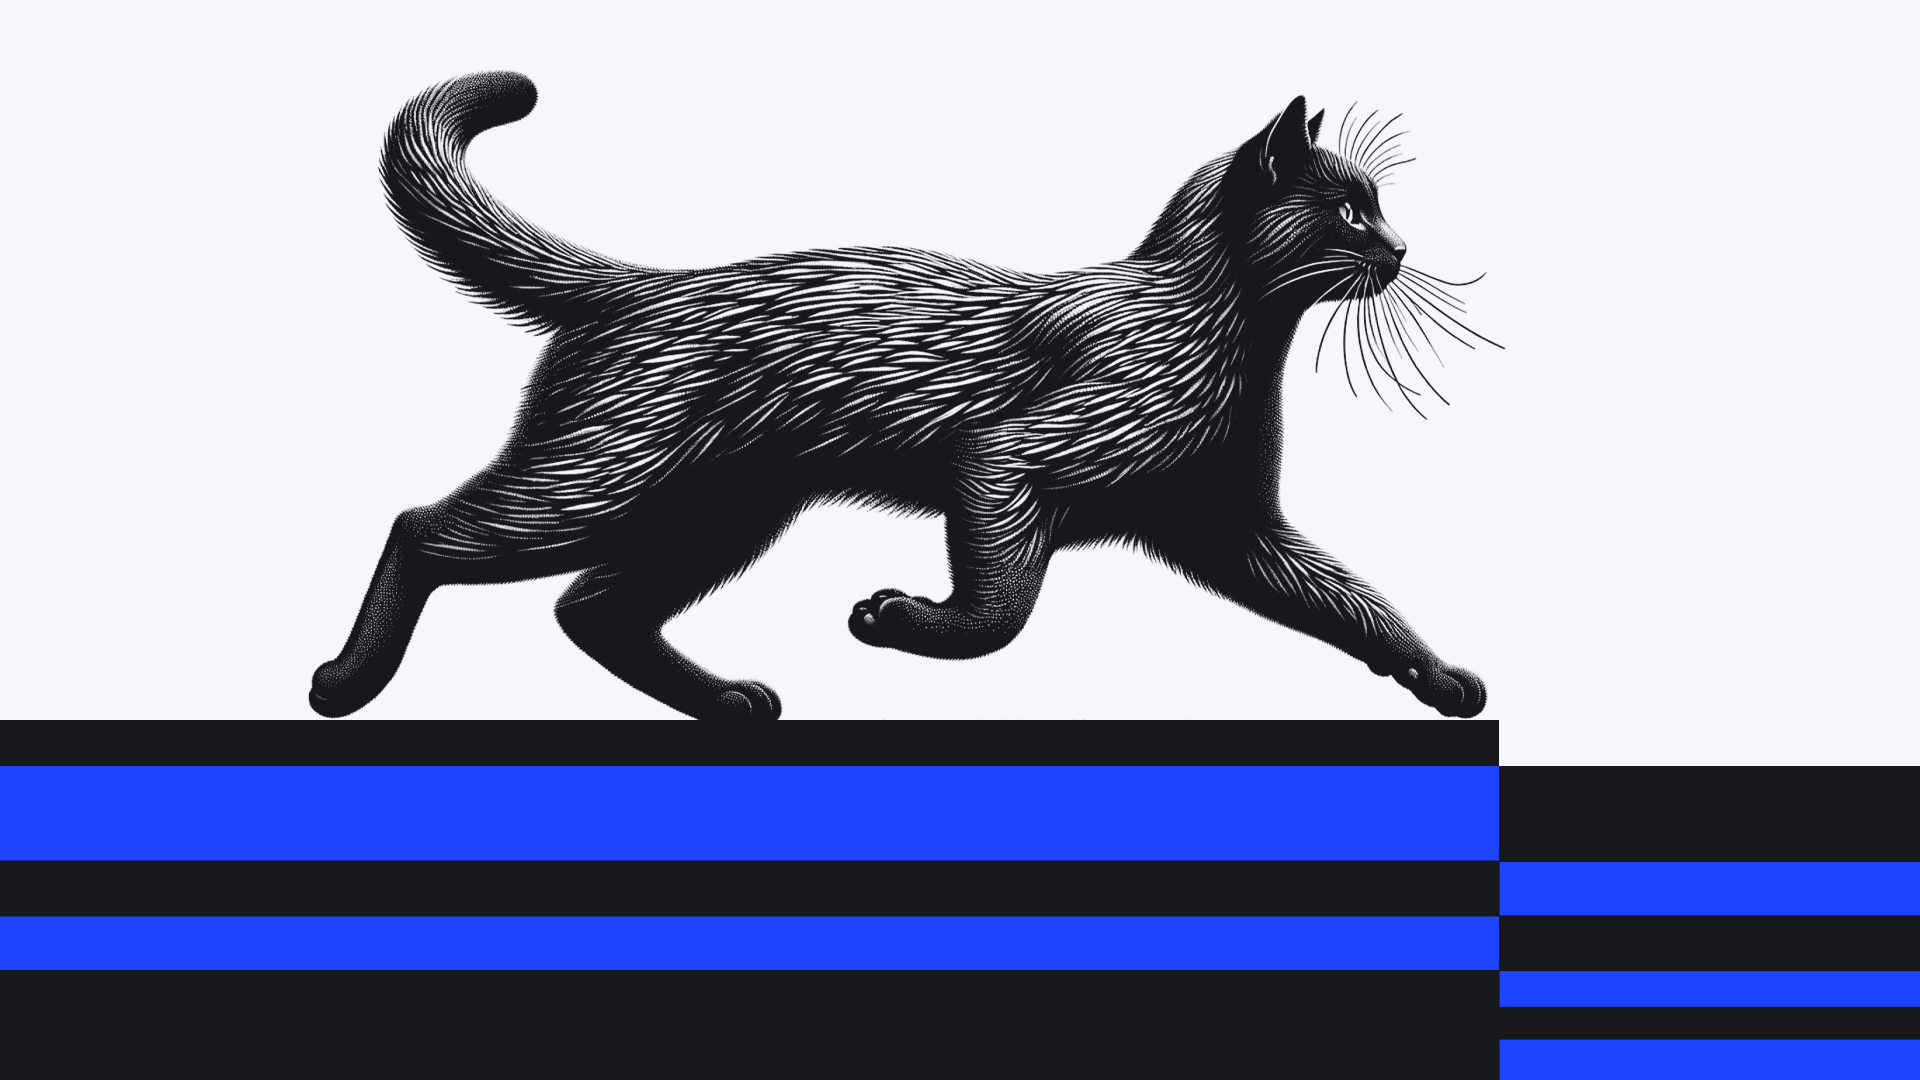 A stylized black cat against a striped blue background seems to distort reality as its body transitions into horizontal lines.